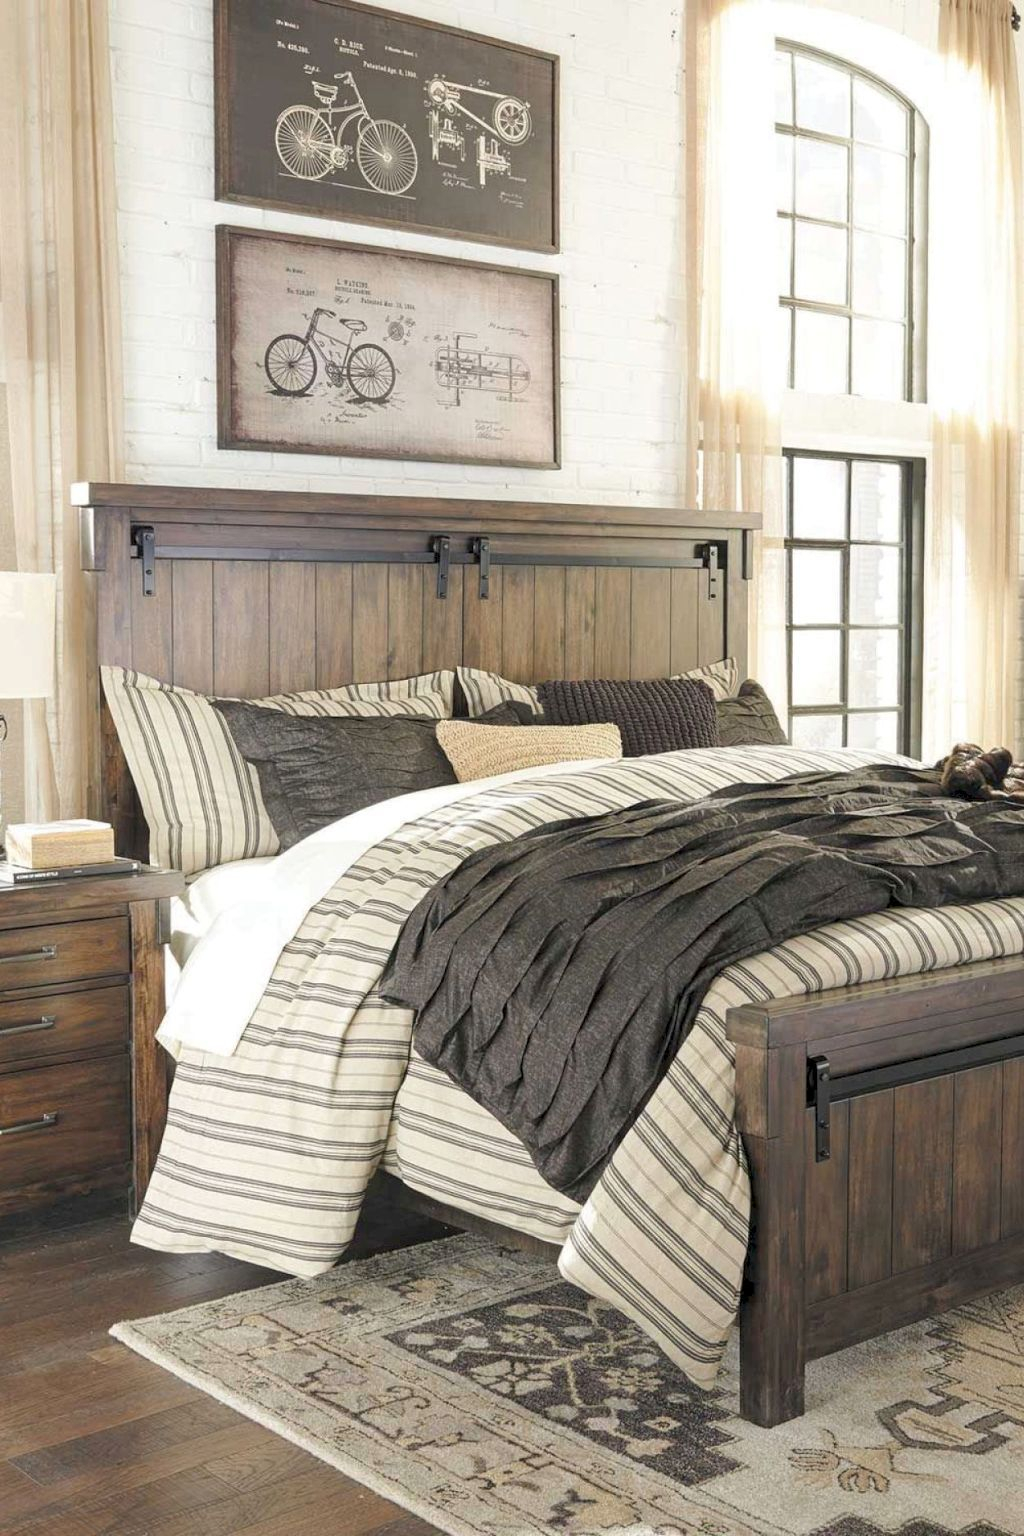 45 Most Popular Rustic Farmhouse Bedroom Design And Decorating Ideas for sizing 1024 X 1536